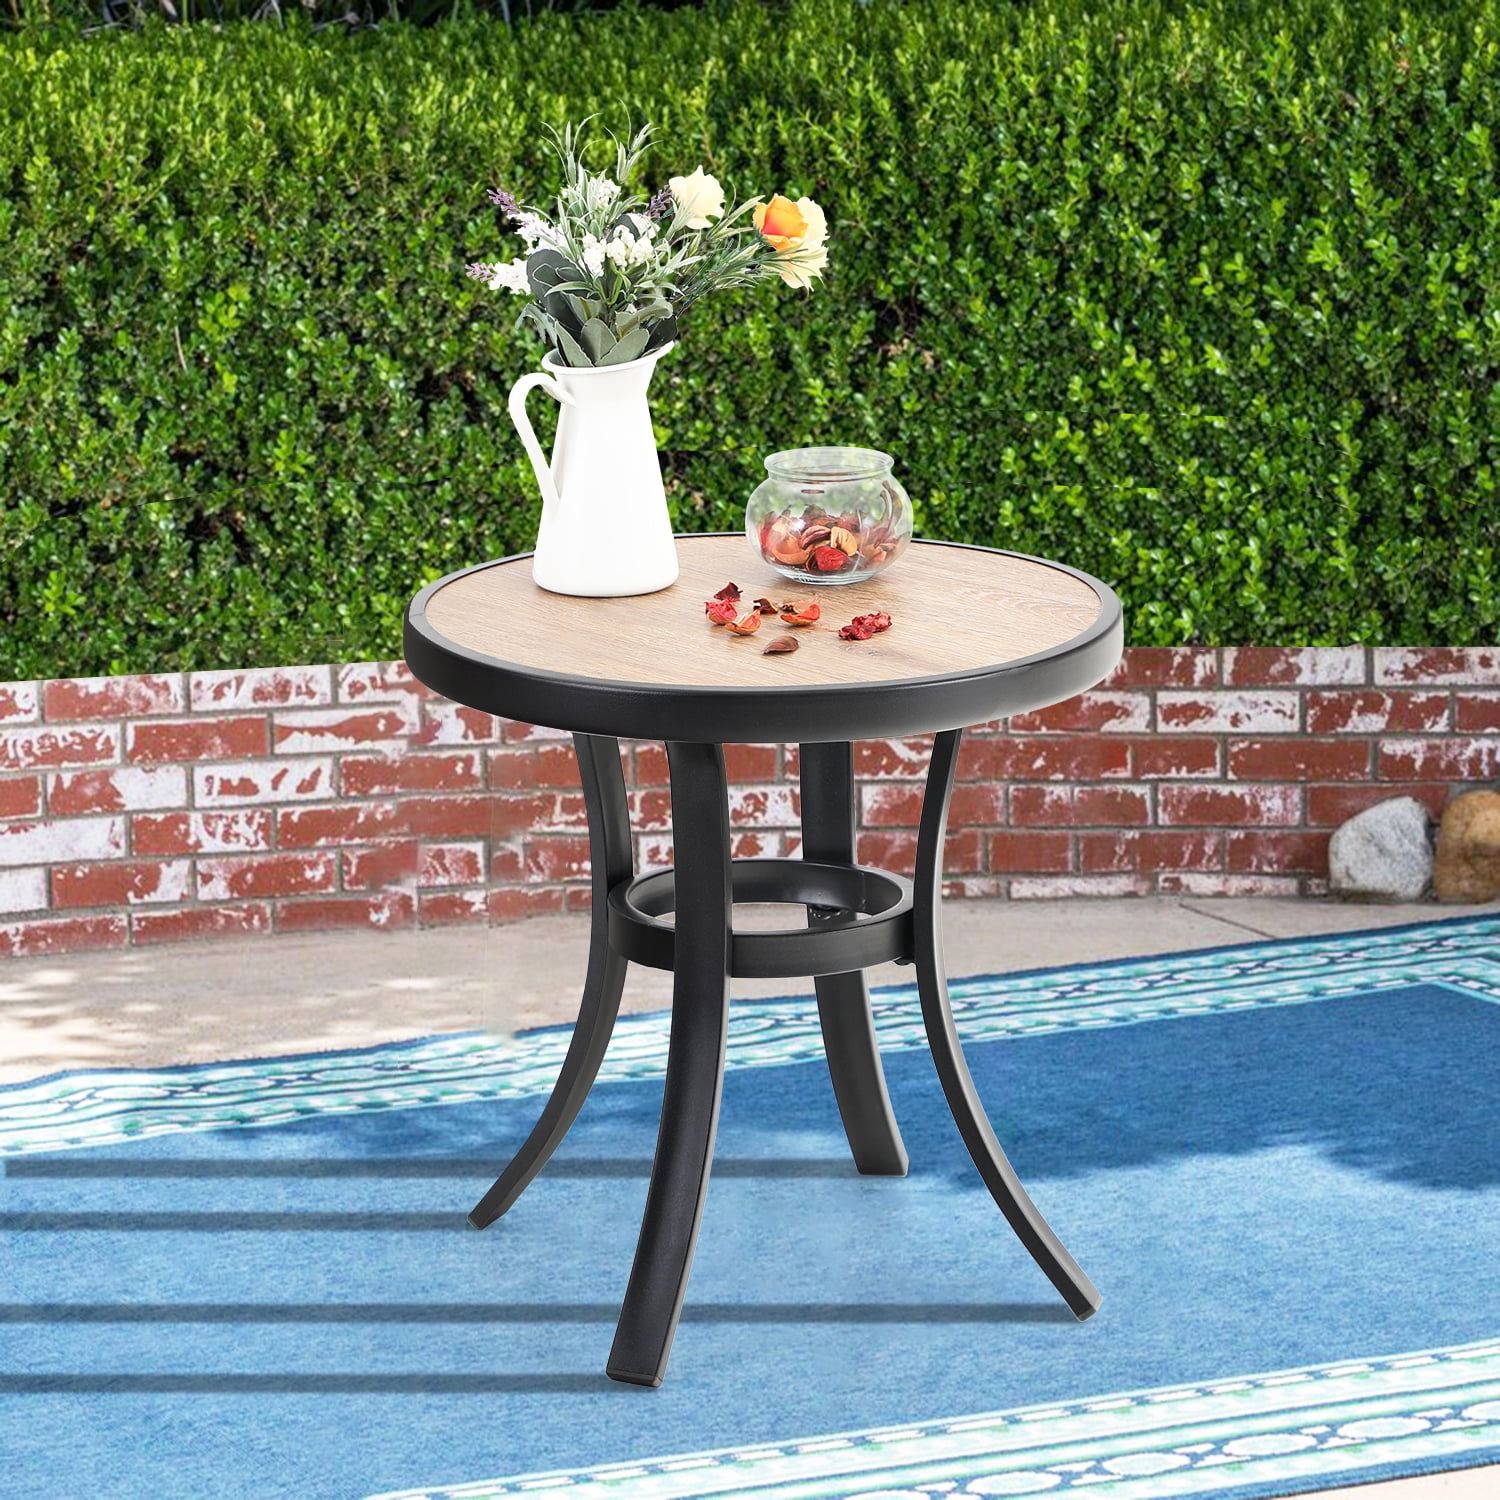 Mf Studio 19 Inches Bistro Side Table, Outdoor Coffee Table Wooden Like Within Modern Outdoor Patio Coffee Tables (Gallery 8 of 20)